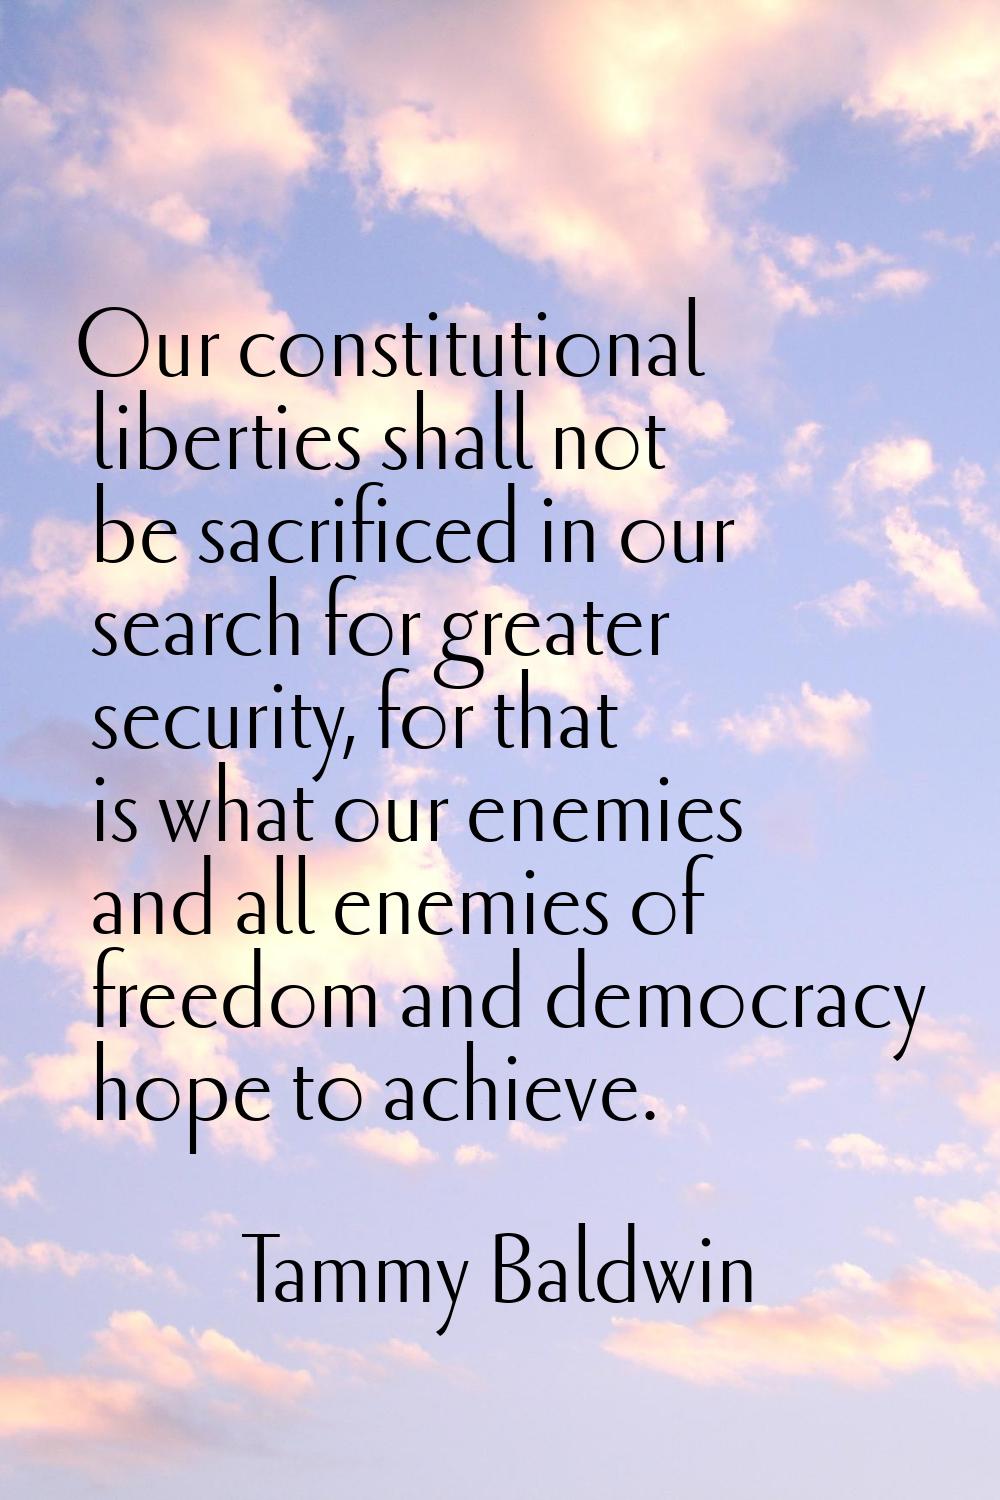 Our constitutional liberties shall not be sacrificed in our search for greater security, for that i